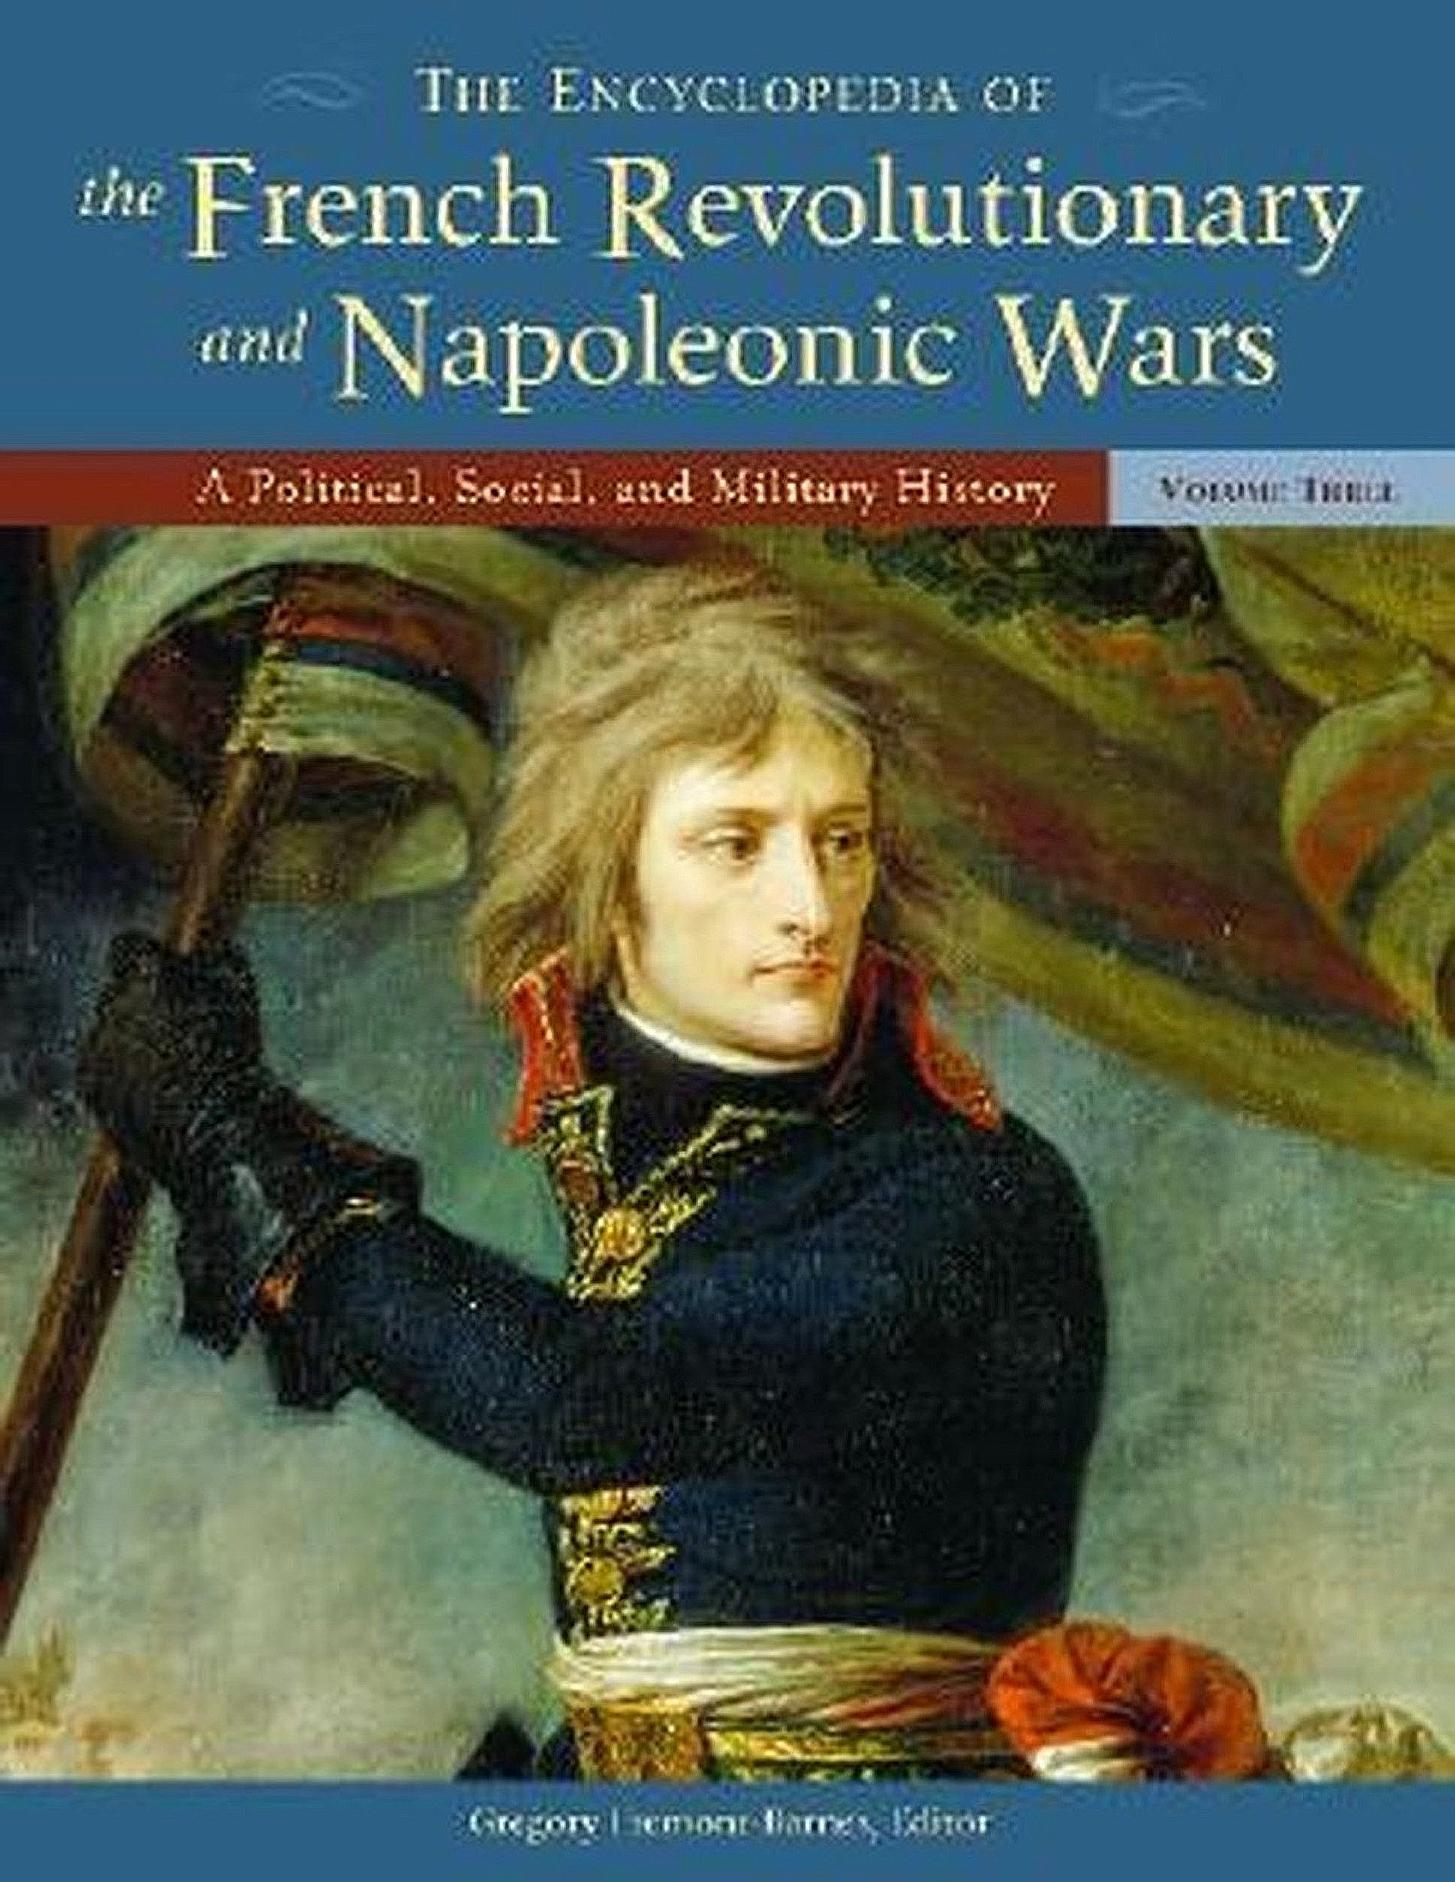 The Encyclopedia of the French Revolutionary and Napoleonic Wars: A Political, Social, and Military History